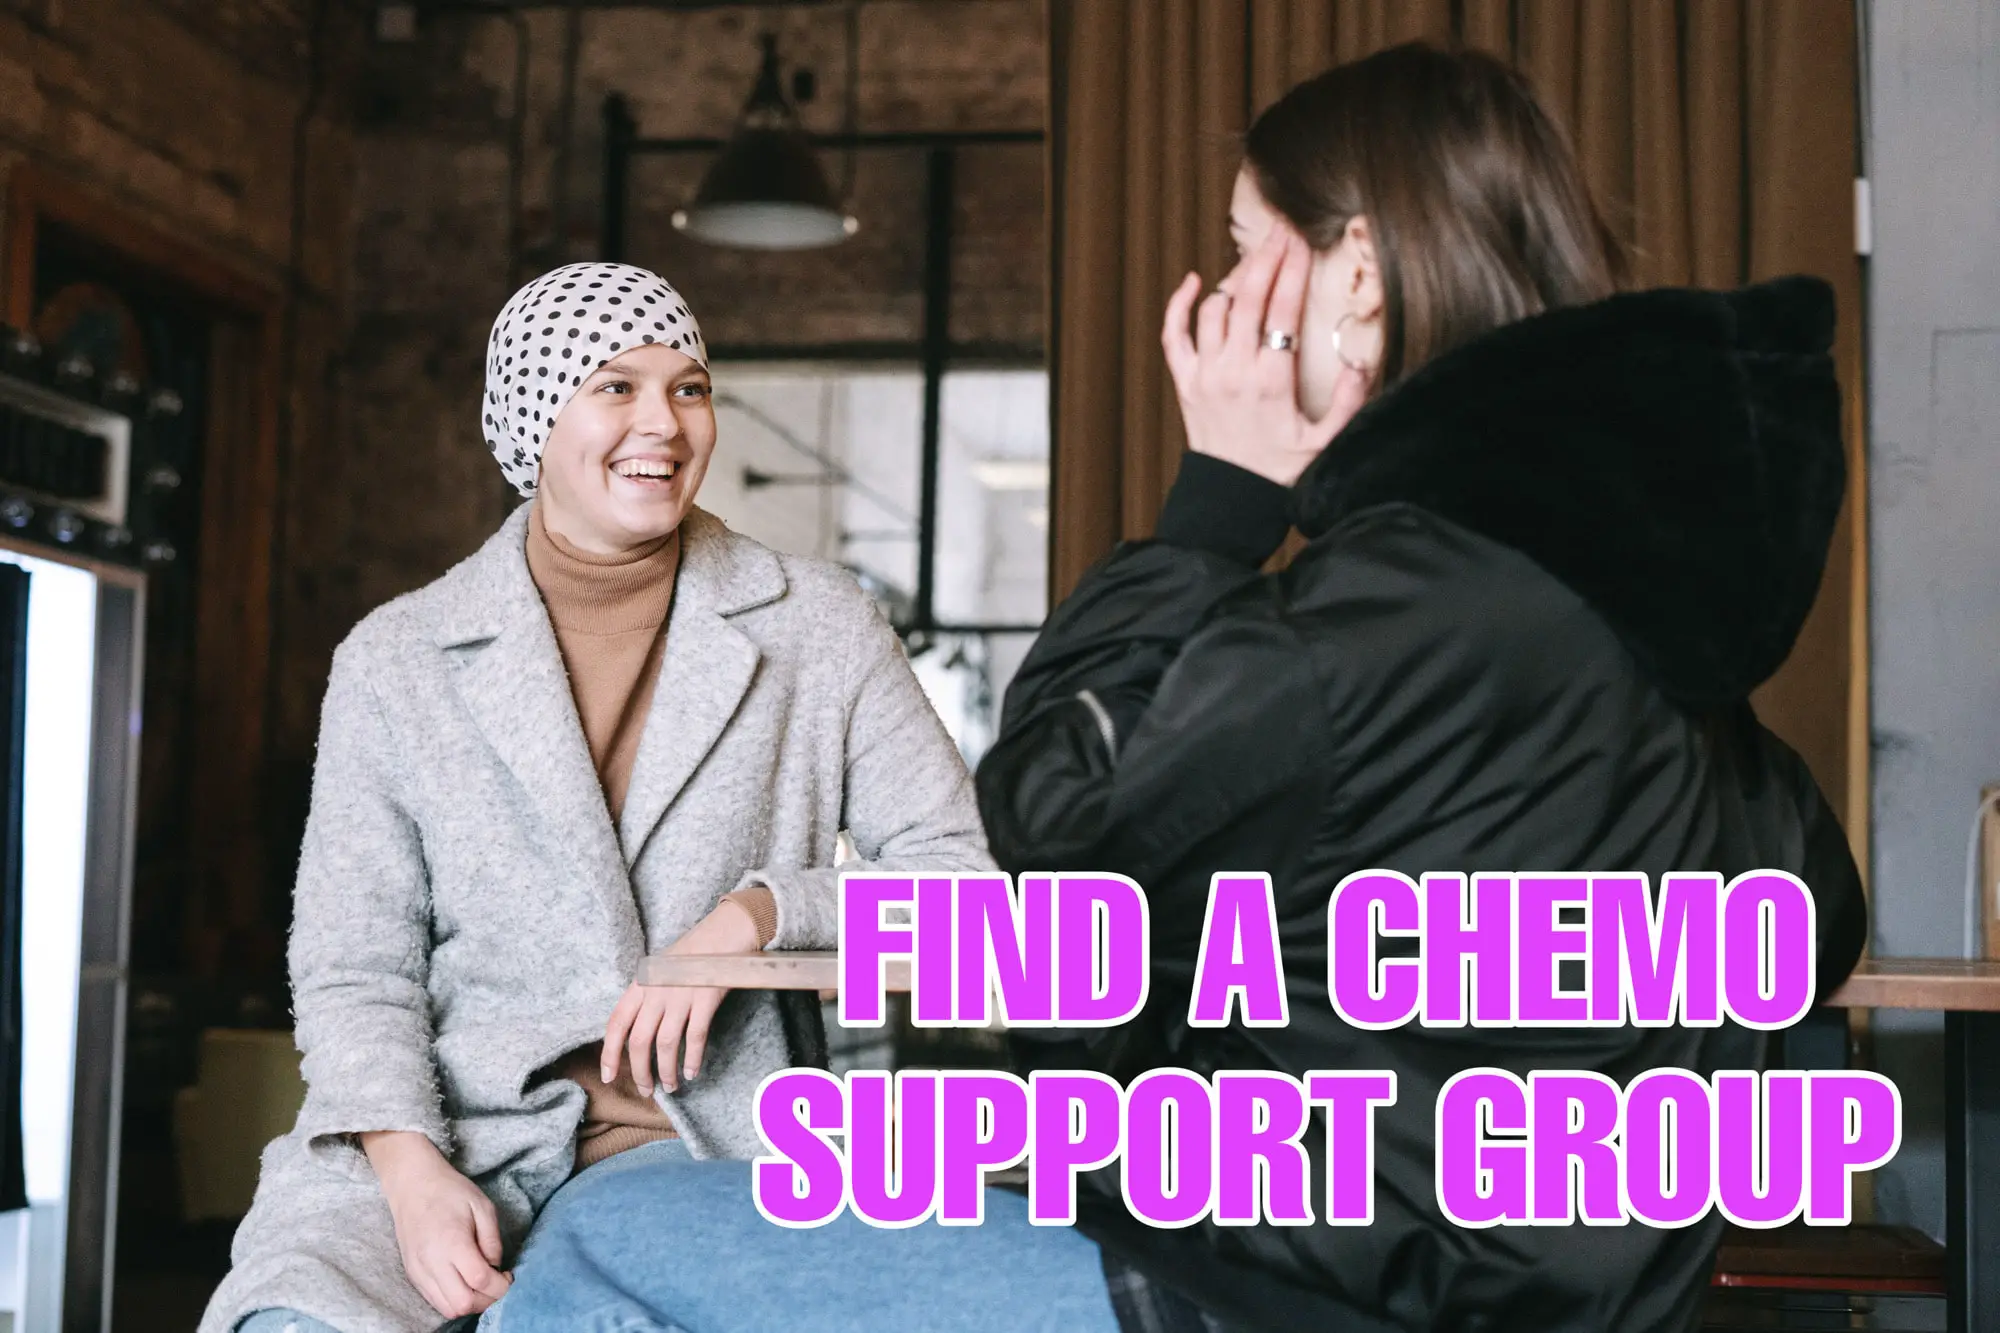 Chemo Hair Loss- How To Find an Amazing Support Group 2022